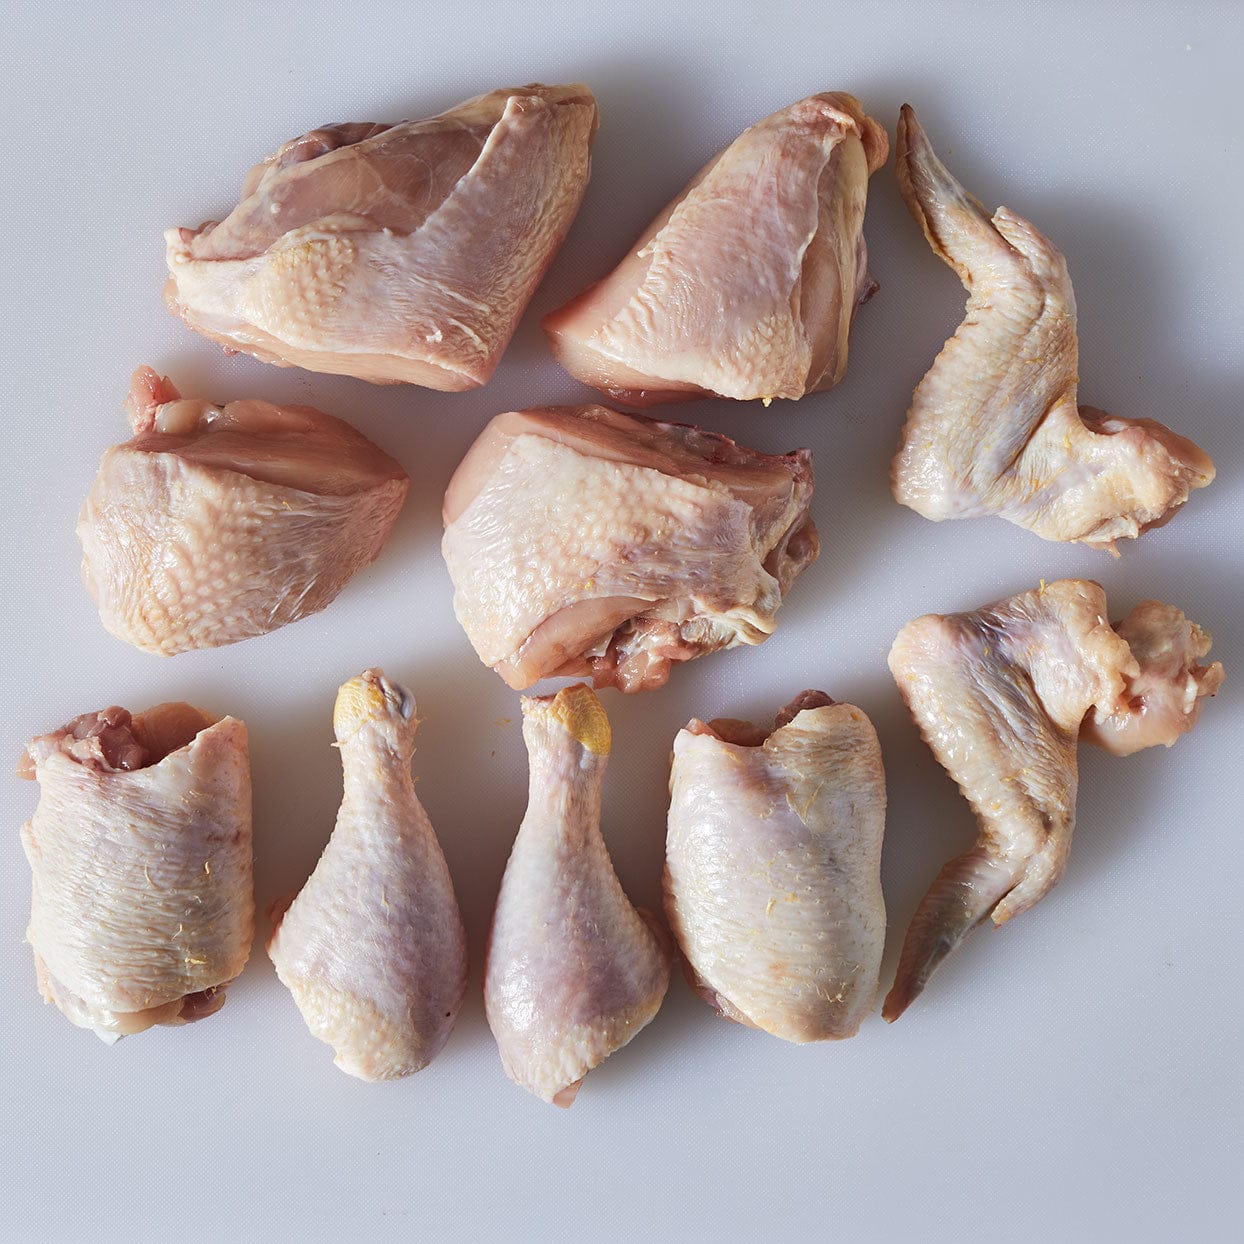 WHOLE CHICKEN (CUT INTO 10 PIECES, SKIN OFF)